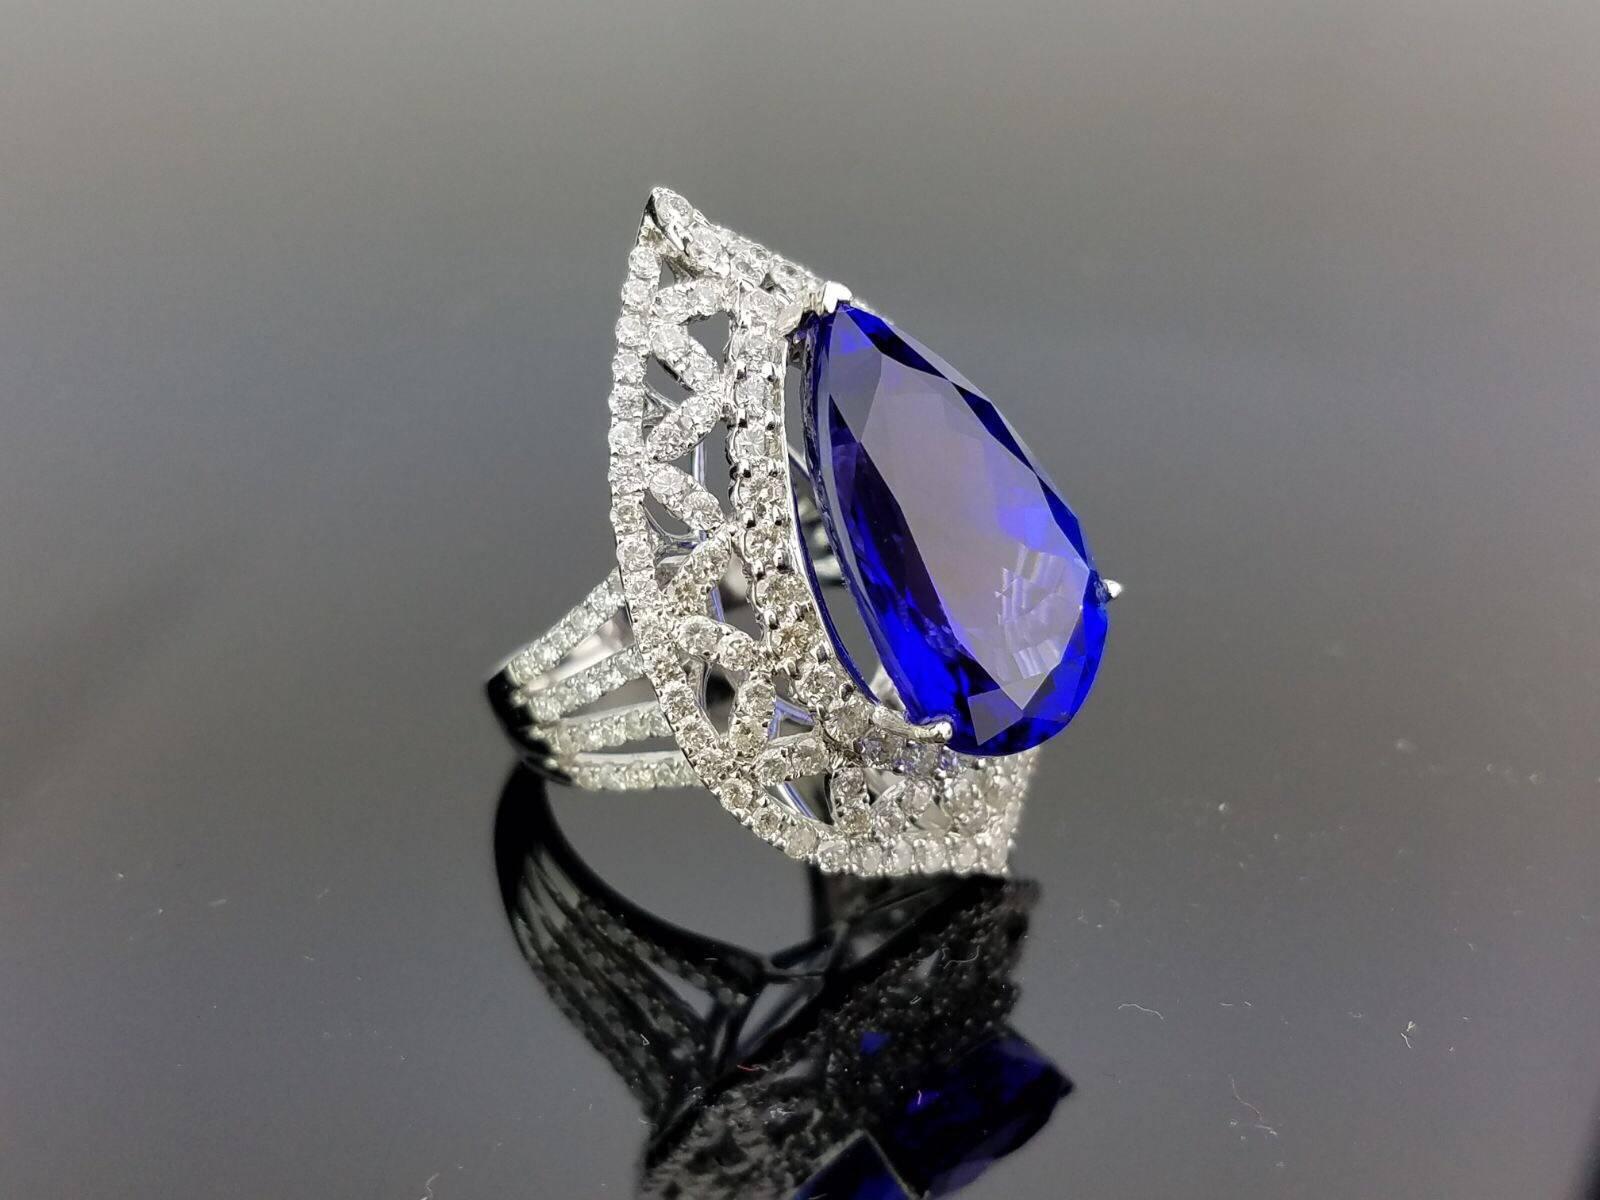 Statement Pear Shape Tanzanite and Diamond Ring on 18K White Gold band

Centre Stone Details:  
Stone: Tanzanite
Cut: Pear 
Weight: 13.51 carat

Diamond Details:
Cut: Brilliant (round) 
Total Carat Weight: 2.36 carat 
Quality: VS/SI , H/I 

18K